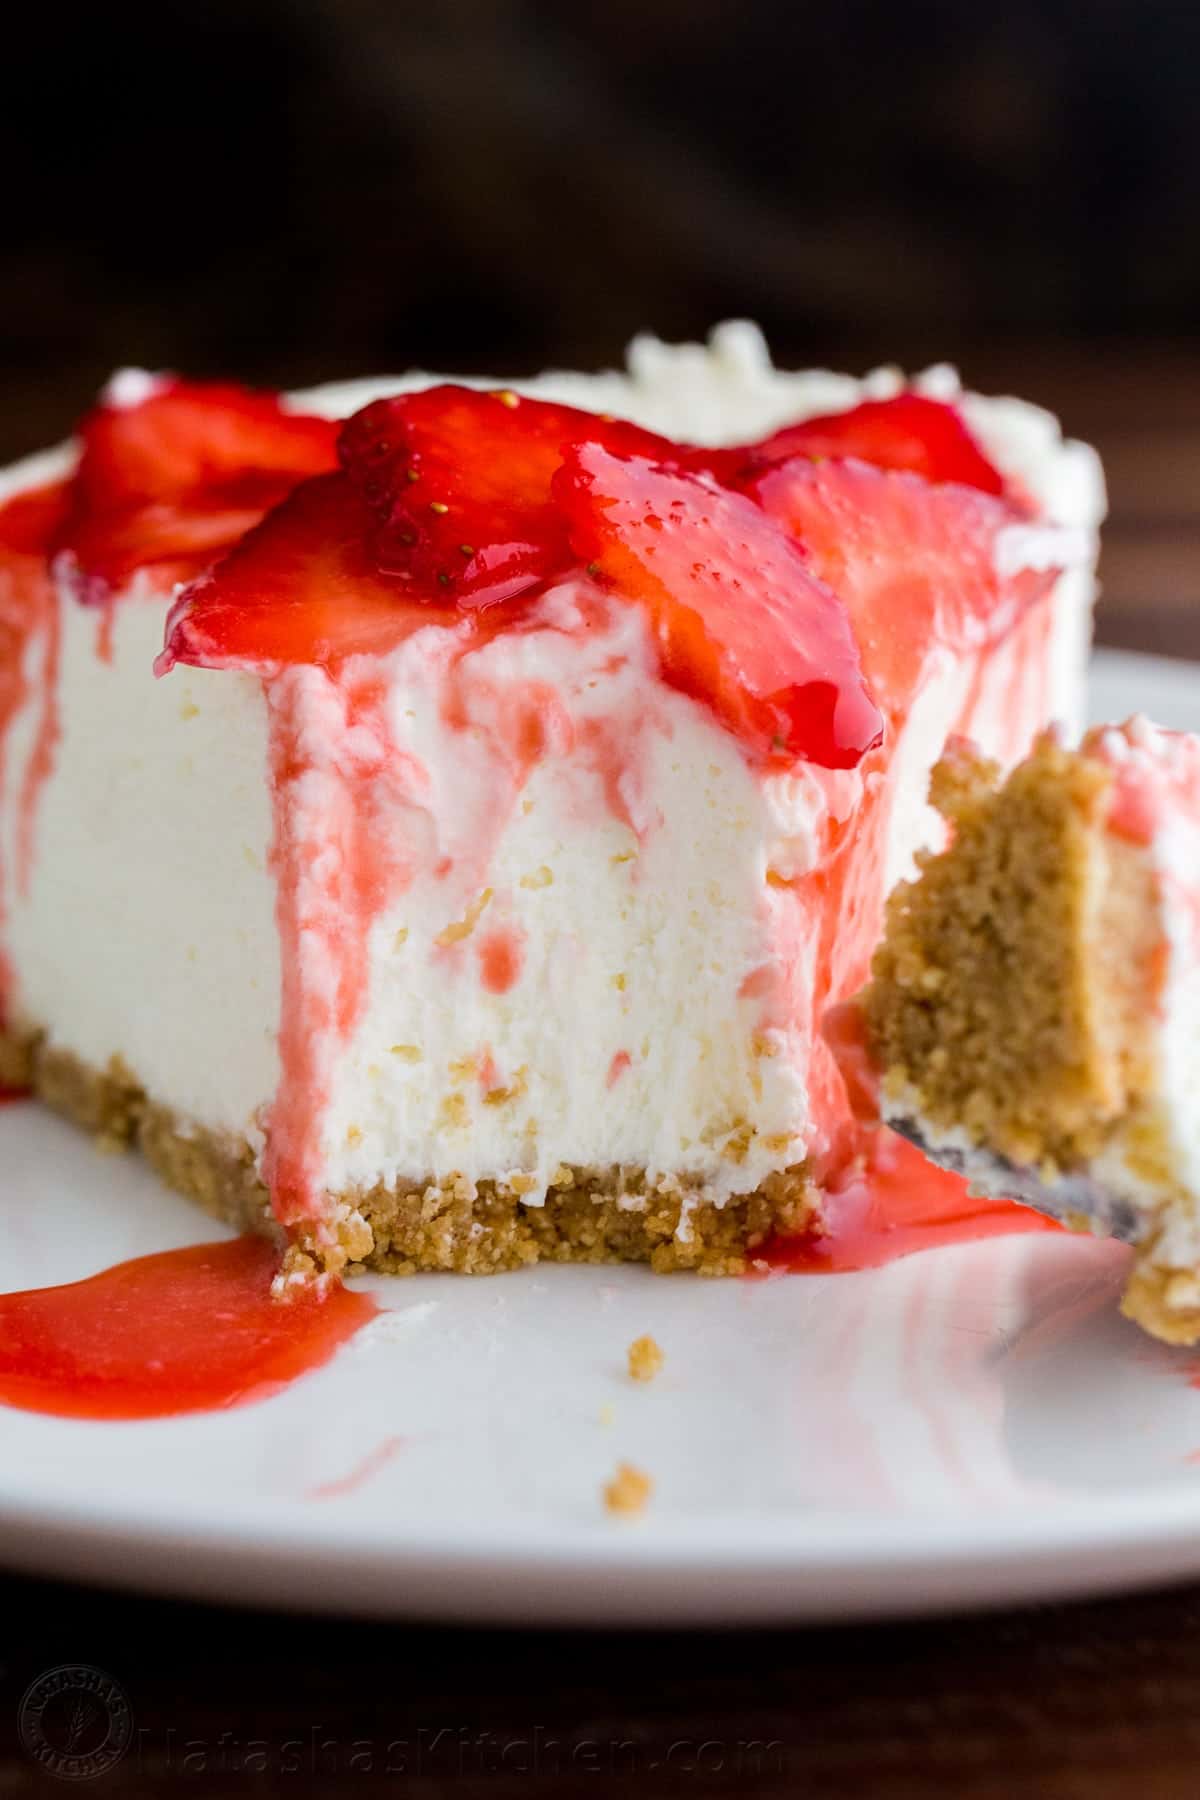 Slice of no bake cheesecake topped with strawberries